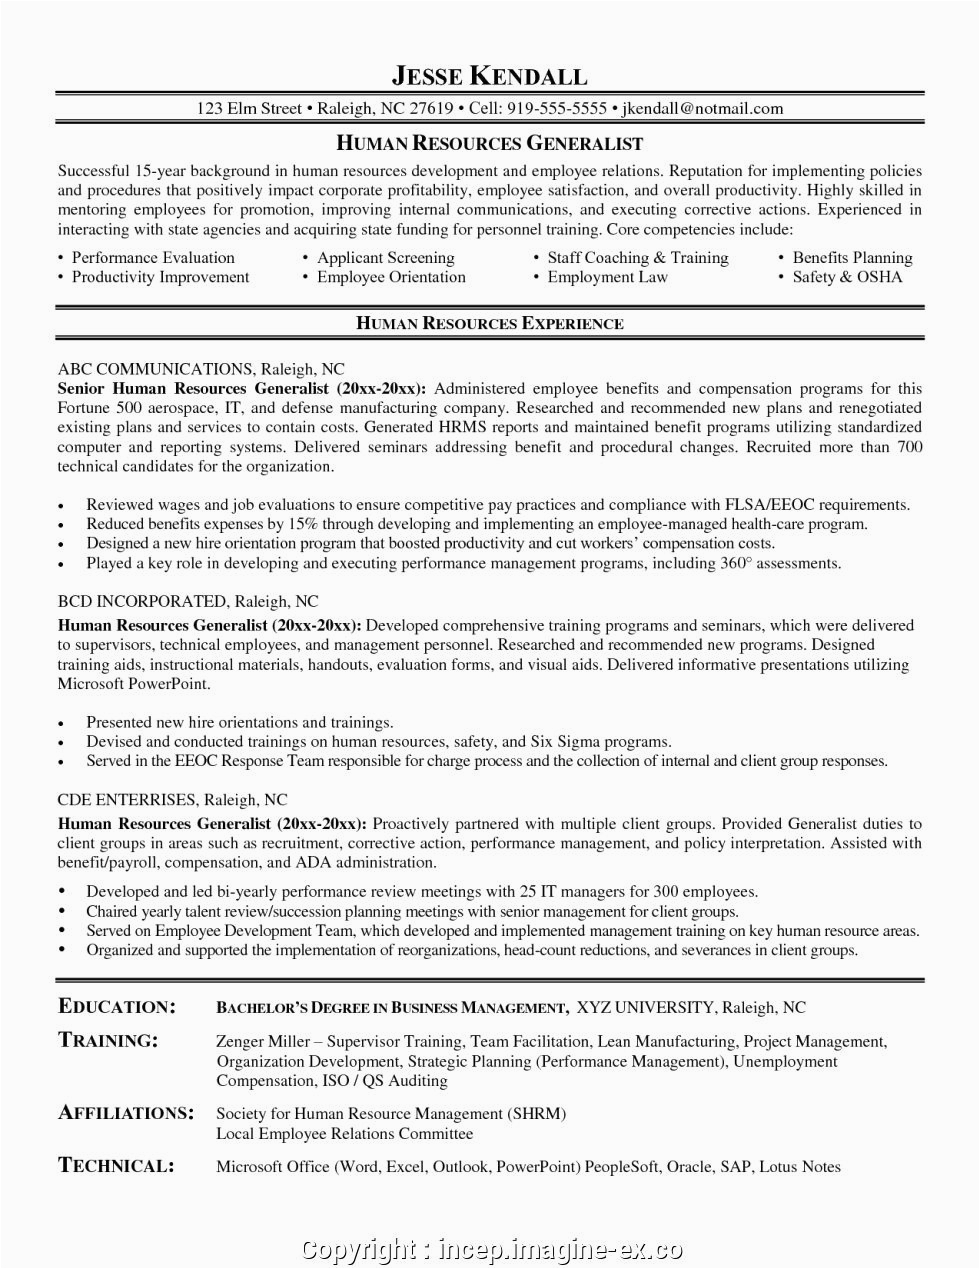 Hr Resume Sample for 3 Years Experience Hr Generalist Resume with 3 Years Experience